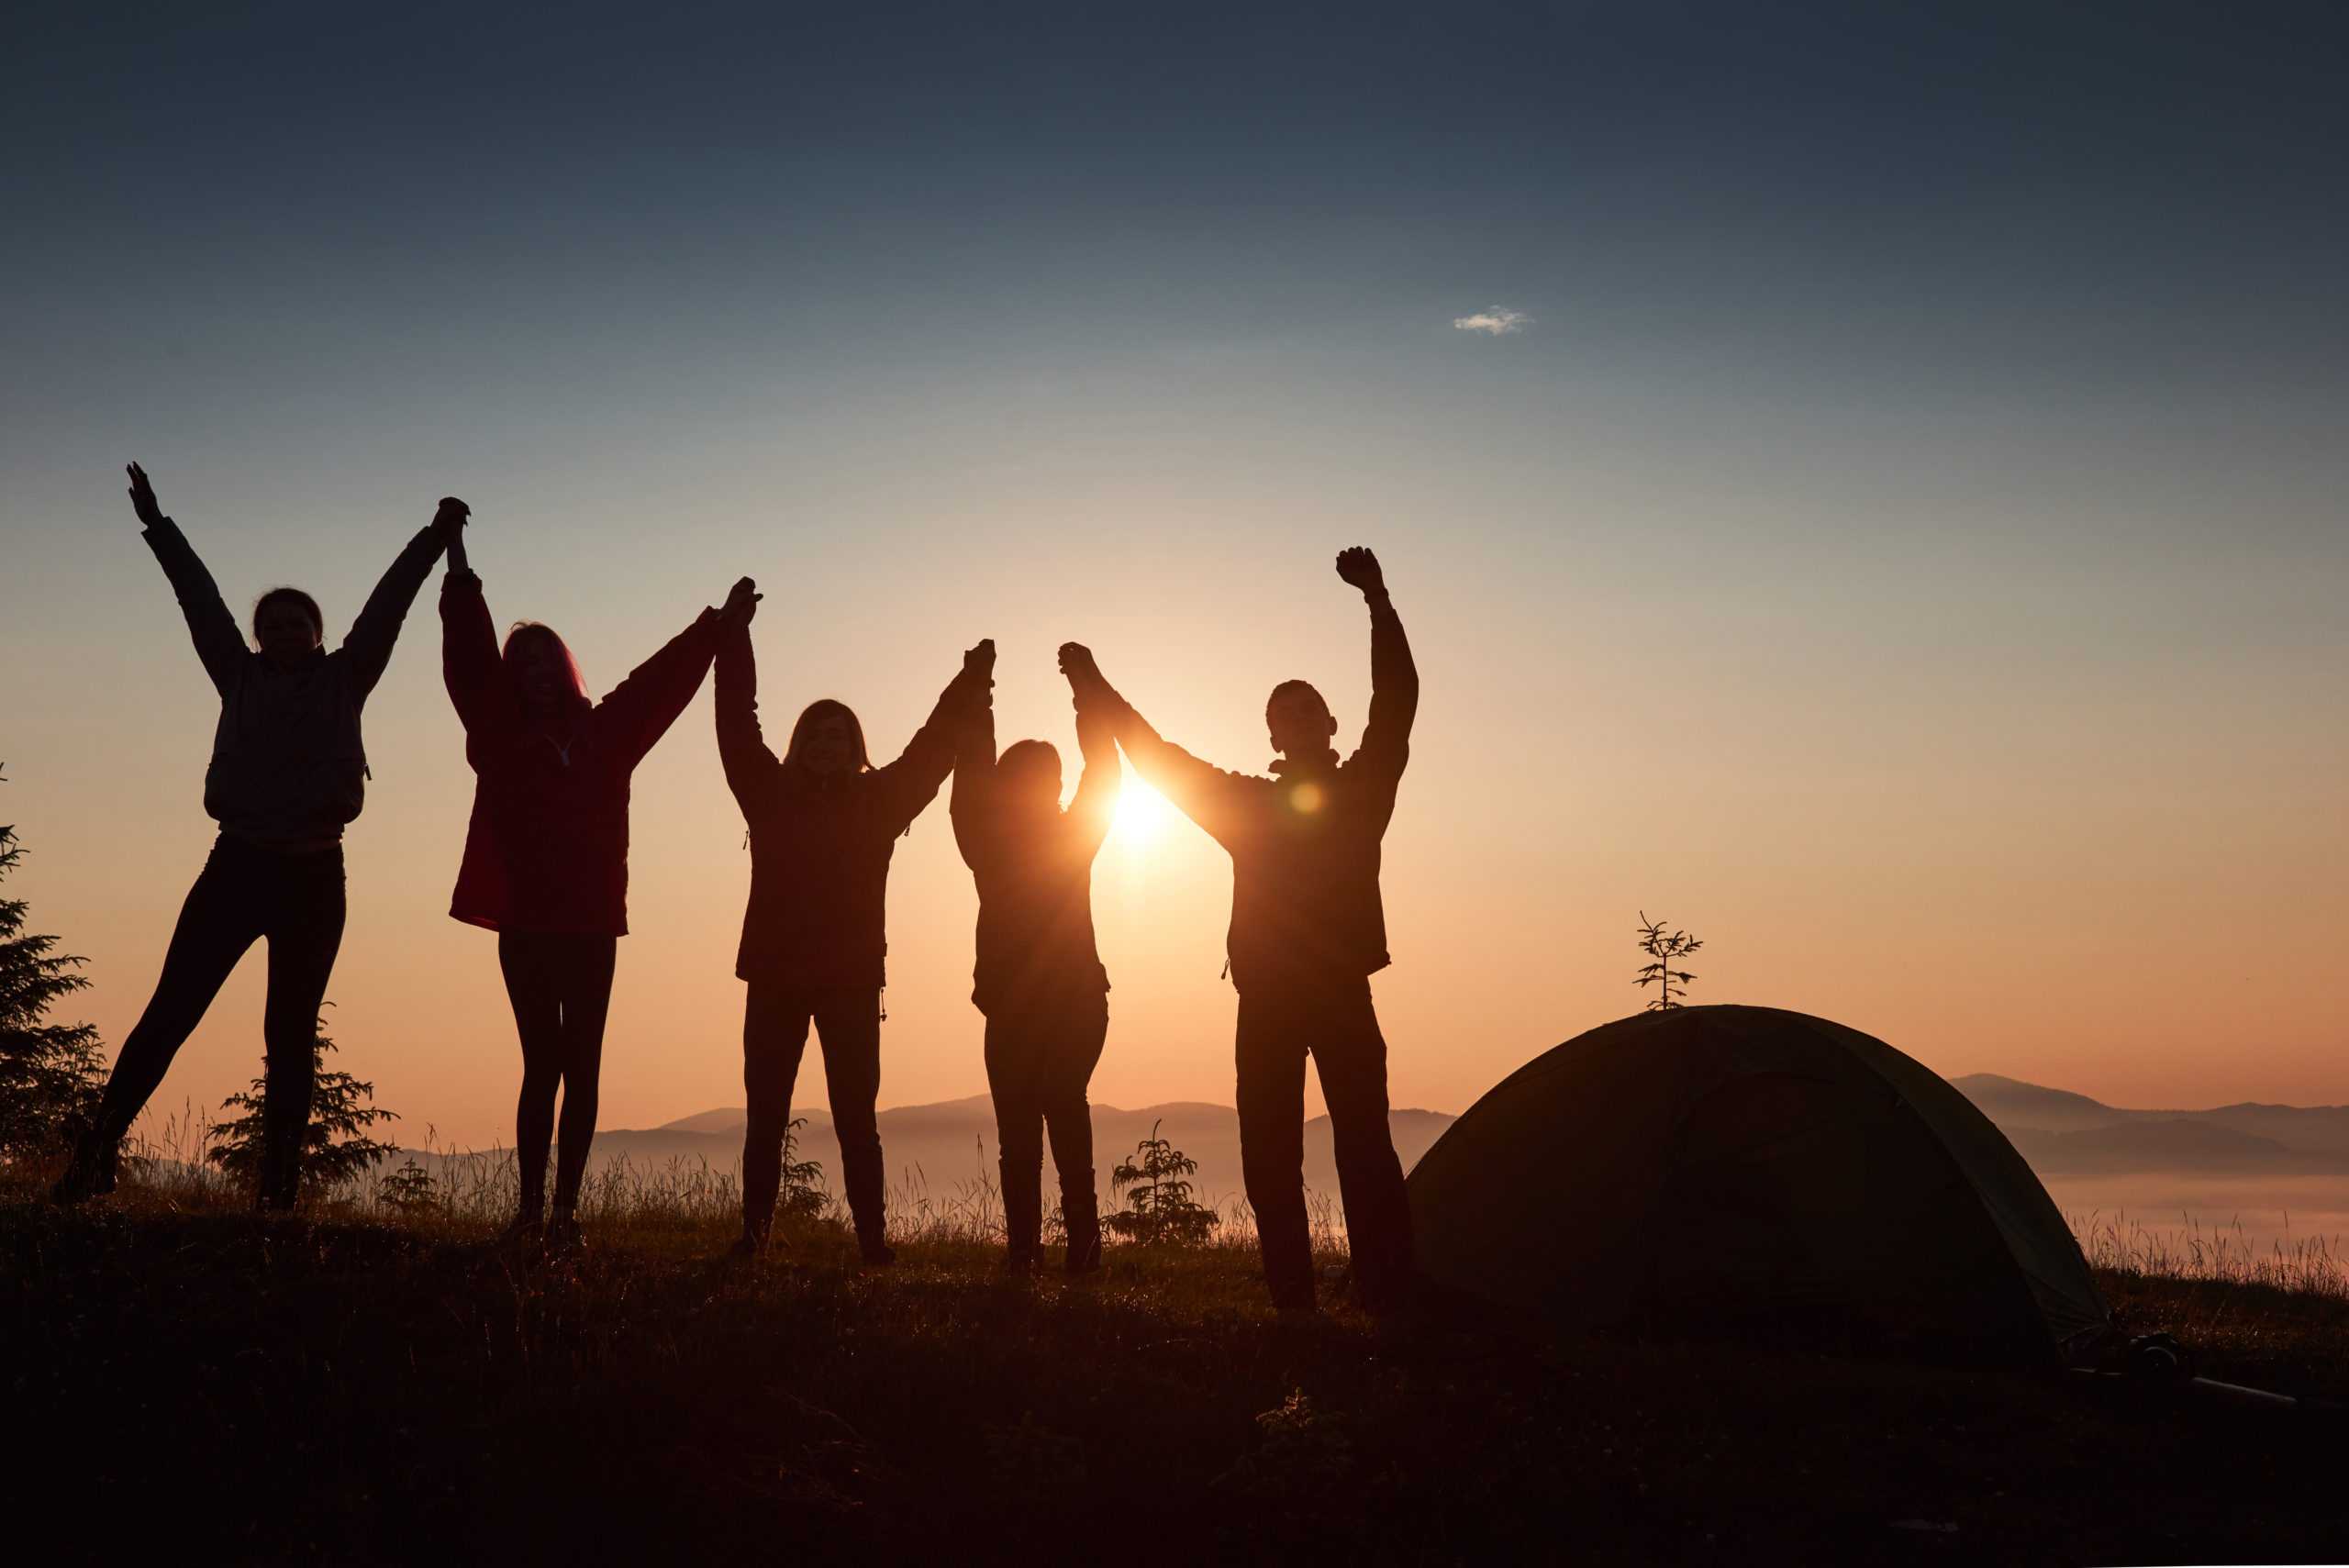 a-silhouette-of-group-people-have-fun-at-the-top-of-the-mountain-near-the-tent-during-the-sunset-scaled